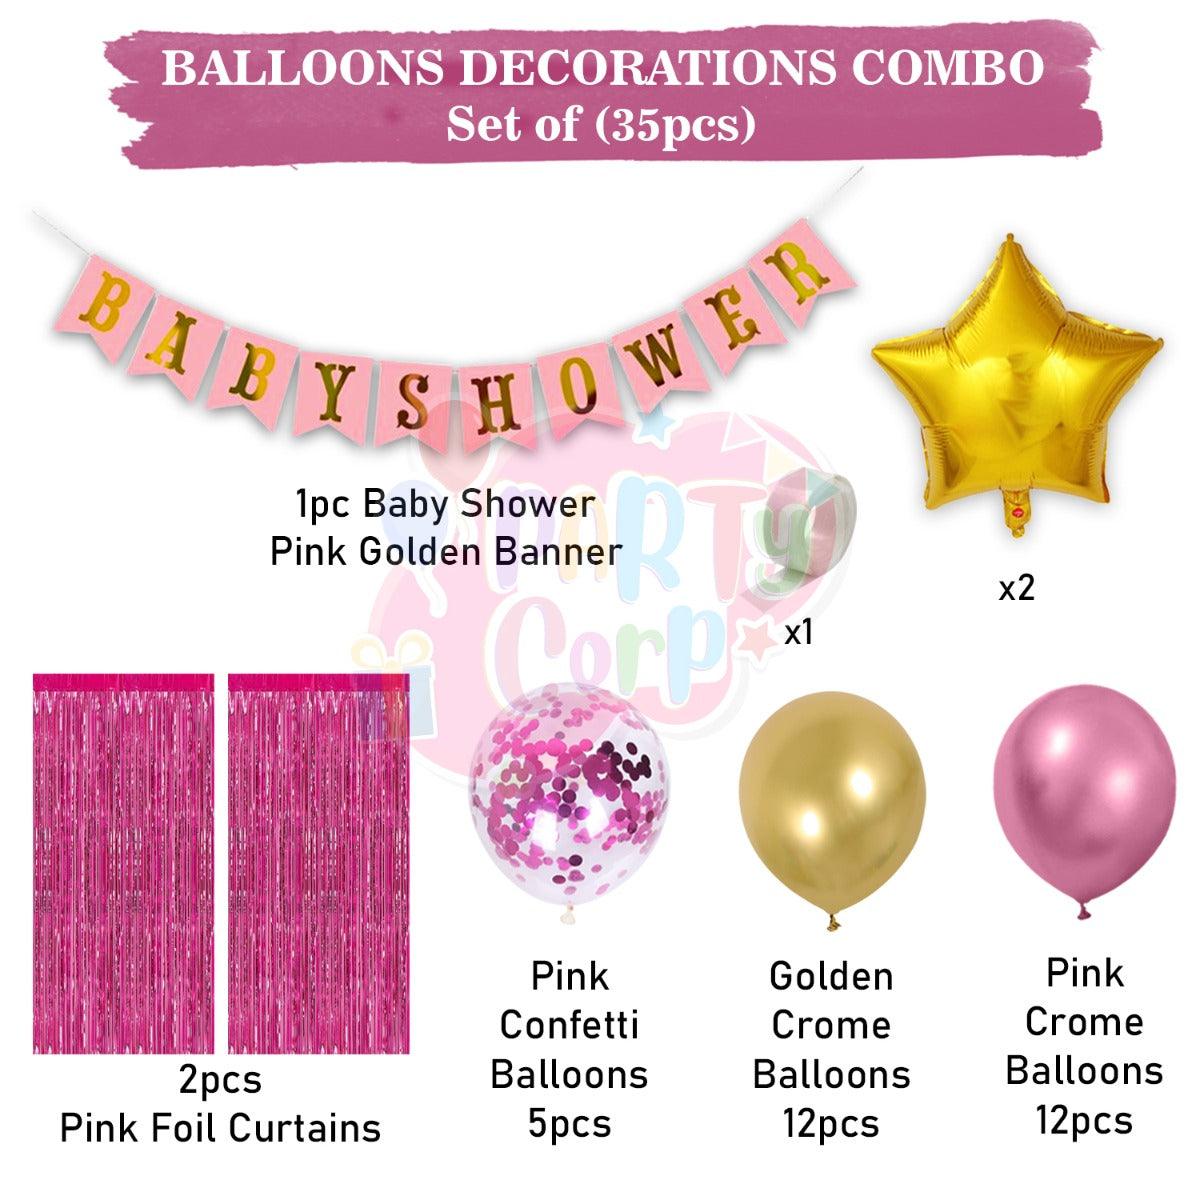 PartyCorp Baby Shower Decoration Kit Combo 35 Pcs - Gold, Pink Chrome & Confetti Balloons, Pink & Gold Banner, Pink Curtain, Gold Star Foil